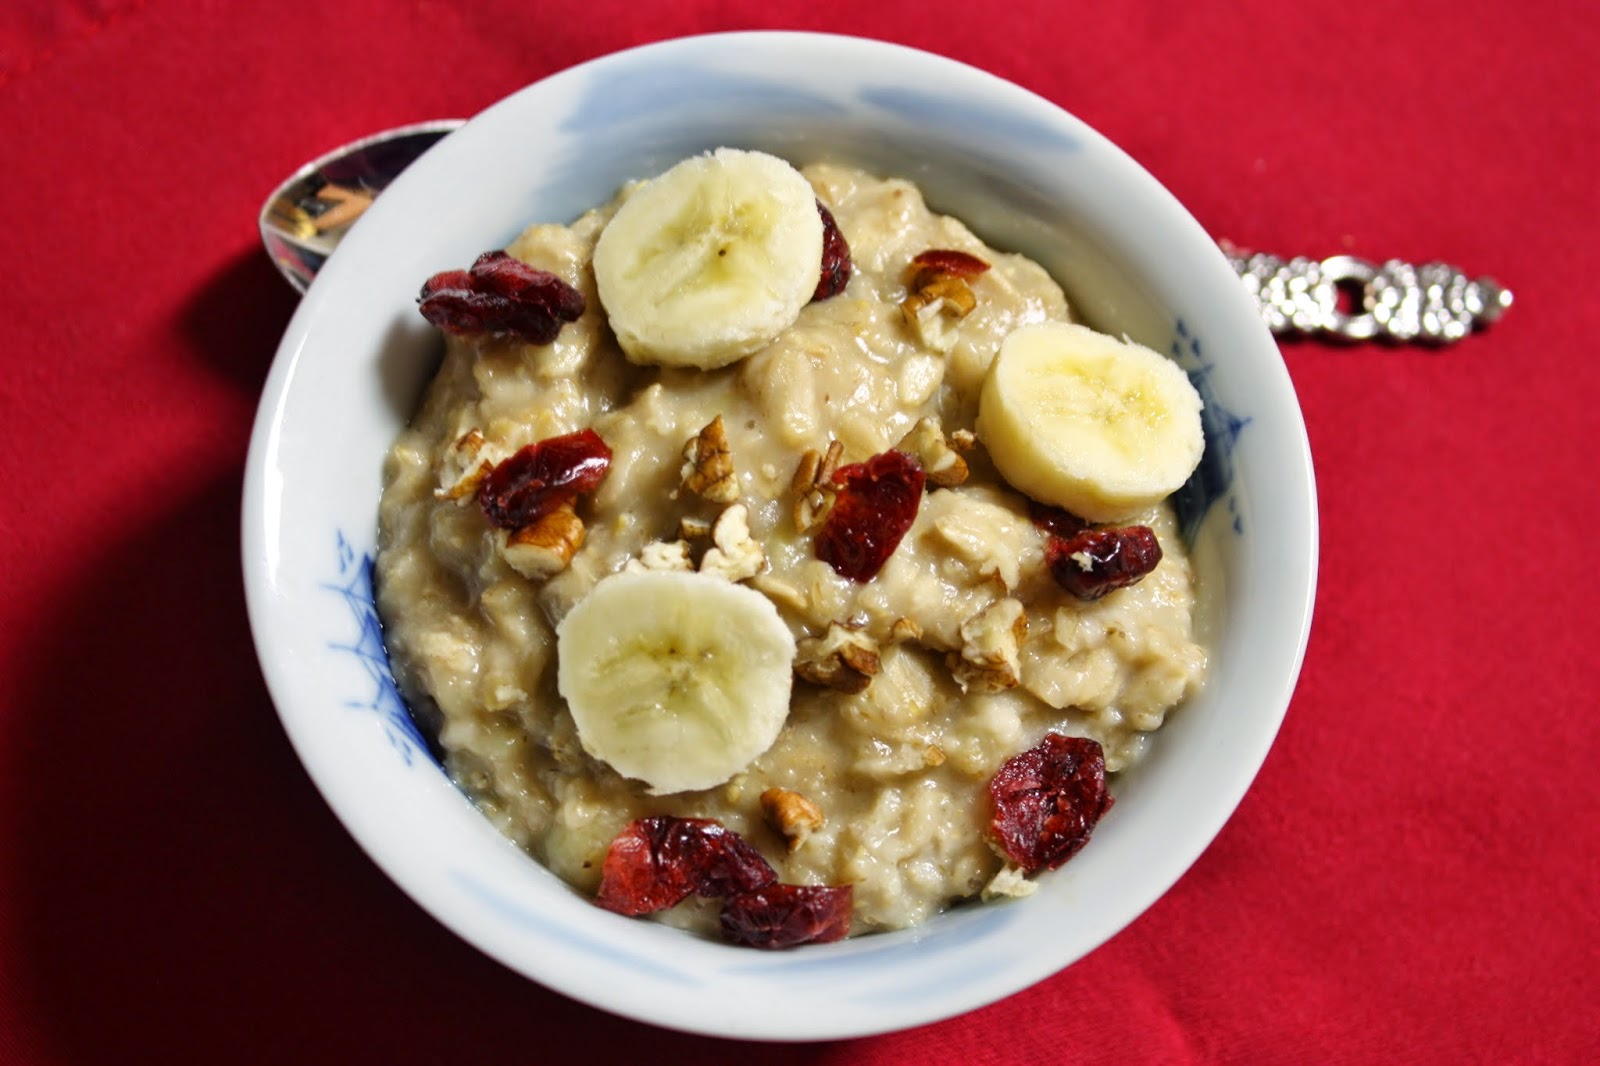 Best of Long Island and Central Florida: Copycat Starbucks Oatmeal